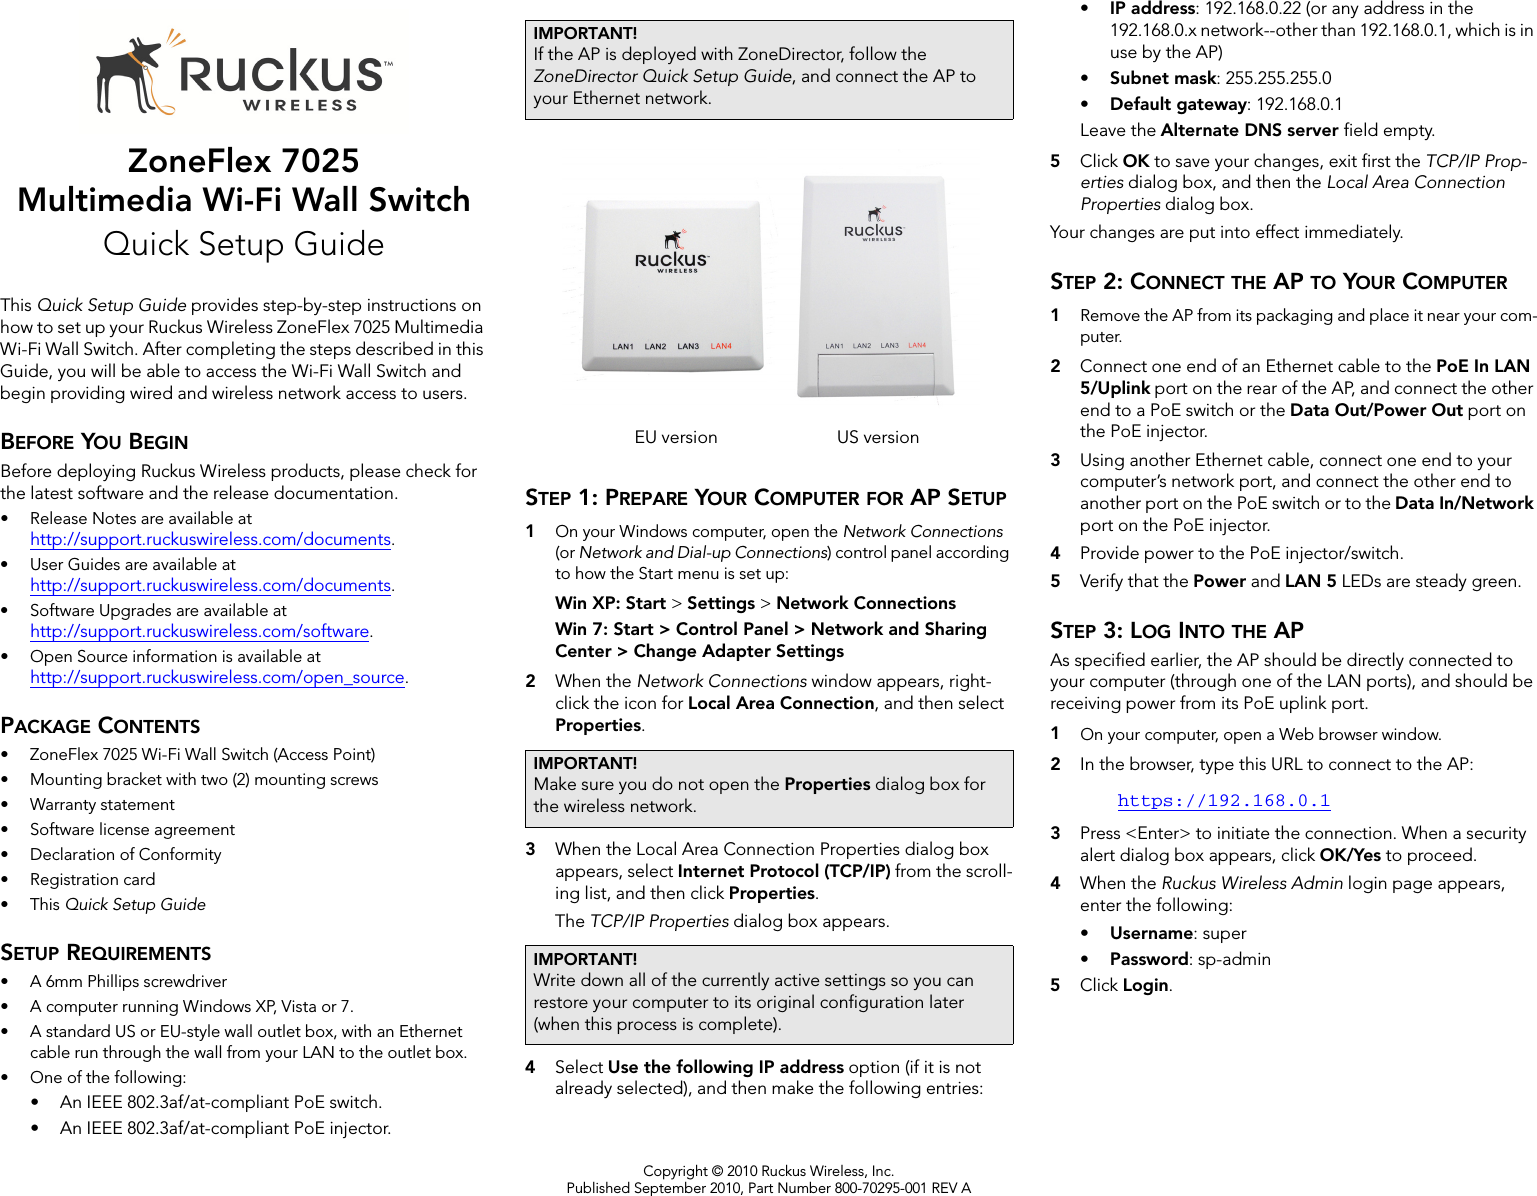 Copyright © 2010 Ruckus Wireless, Inc.Published September 2010, Part Number 800-70295-001 REV AZoneFlex 7025Multimedia Wi-Fi Wall SwitchQuick Setup GuideThis Quick Setup Guide provides step-by-step instructions on how to set up your Ruckus Wireless ZoneFlex 7025 Multimedia Wi-Fi Wall Switch. After completing the steps described in this Guide, you will be able to access the Wi-Fi Wall Switch and begin providing wired and wireless network access to users.BEFORE YOU BEGINBefore deploying Ruckus Wireless products, please check for the latest software and the release documentation.• Release Notes are available at http://support.ruckuswireless.com/documents.• User Guides are available at http://support.ruckuswireless.com/documents.• Software Upgrades are available athttp://support.ruckuswireless.com/software.• Open Source information is available athttp://support.ruckuswireless.com/open_source.PACKAGE CONTENTS• ZoneFlex 7025 Wi-Fi Wall Switch (Access Point)• Mounting bracket with two (2) mounting screws• Warranty statement• Software license agreement• Declaration of Conformity• Registration card•This Quick Setup GuideSETUP REQUIREMENTS• A 6mm Phillips screwdriver• A computer running Windows XP, Vista or 7.• A standard US or EU-style wall outlet box, with an Ethernet cable run through the wall from your LAN to the outlet box.• One of the following:• An IEEE 802.3af/at-compliant PoE switch. • An IEEE 802.3af/at-compliant PoE injector. STEP 1: PREPARE YOUR COMPUTER FOR AP SETUP1On your Windows computer, open the Network Connections (or Network and Dial-up Connections) control panel according to how the Start menu is set up: Win XP: Start &gt; Settings &gt; Network ConnectionsWin 7: Start &gt; Control Panel &gt; Network and Sharing Center &gt; Change Adapter Settings2When the Network Connections window appears, right-click the icon for Local Area Connection, and then select Properties. 3When the Local Area Connection Properties dialog box appears, select Internet Protocol (TCP/IP) from the scroll-ing list, and then click Properties. The TCP/IP Properties dialog box appears.4Select Use the following IP address option (if it is not already selected), and then make the following entries:•IP address: 192.168.0.22 (or any address in the 192.168.0.x network--other than 192.168.0.1, which is in use by the AP)•Subnet mask: 255.255.255.0•Default gateway: 192.168.0.1Leave the Alternate DNS server field empty.5Click OK to save your changes, exit first the TCP/IP Prop-erties dialog box, and then the Local Area Connection Properties dialog box. Your changes are put into effect immediately. STEP 2: CONNECT THE AP TO YOUR COMPUTER1Remove the AP from its packaging and place it near your com-puter. 2Connect one end of an Ethernet cable to the PoE In LAN 5/Uplink port on the rear of the AP, and connect the other end to a PoE switch or the Data Out/Power Out port on the PoE injector.3Using another Ethernet cable, connect one end to your computer’s network port, and connect the other end to another port on the PoE switch or to the Data In/Network port on the PoE injector.4Provide power to the PoE injector/switch.5Verify that the Power and LAN 5 LEDs are steady green.STEP 3: LOG INTO THE APAs specified earlier, the AP should be directly connected to your computer (through one of the LAN ports), and should be receiving power from its PoE uplink port. 1On your computer, open a Web browser window.2In the browser, type this URL to connect to the AP: https://192.168.0.13Press &lt;Enter&gt; to initiate the connection. When a security alert dialog box appears, click OK/Yes to proceed.4When the Ruckus Wireless Admin login page appears, enter the following: •Username: super•Password: sp-admin5Click Login.IMPORTANT!If the AP is deployed with ZoneDirector, follow the ZoneDirector Quick Setup Guide, and connect the AP to your Ethernet network.IMPORTANT!Make sure you do not open the Properties dialog box for the wireless network.IMPORTANT!Write down all of the currently active settings so you can restore your computer to its original configuration later (when this process is complete).EU version US version